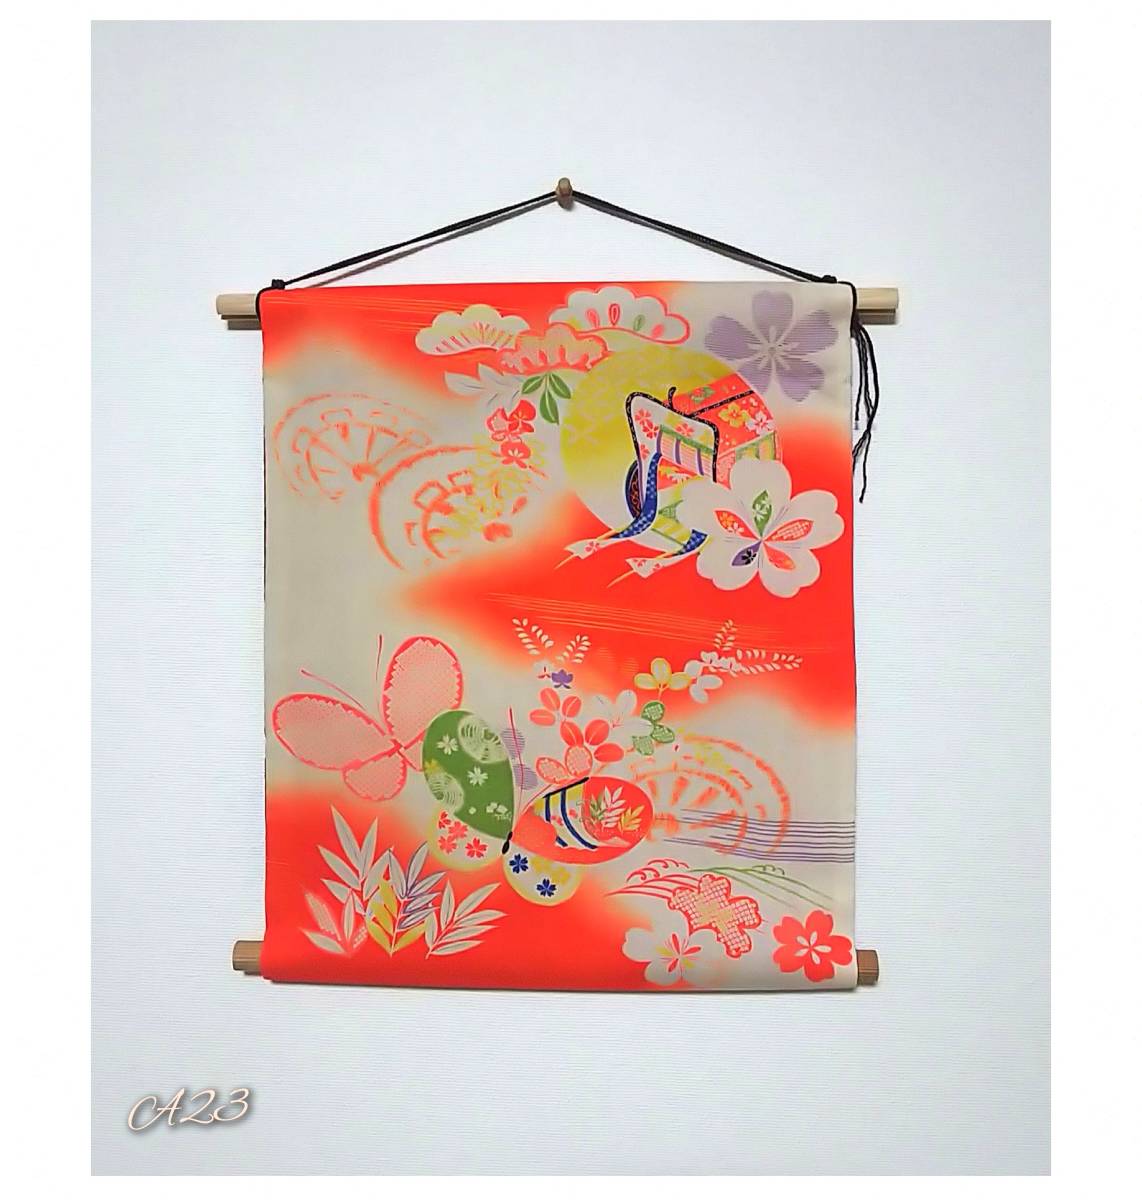 Kimono remake cute tapestry wall hanging decoration handmade, sewing, embroidery, Finished product, others